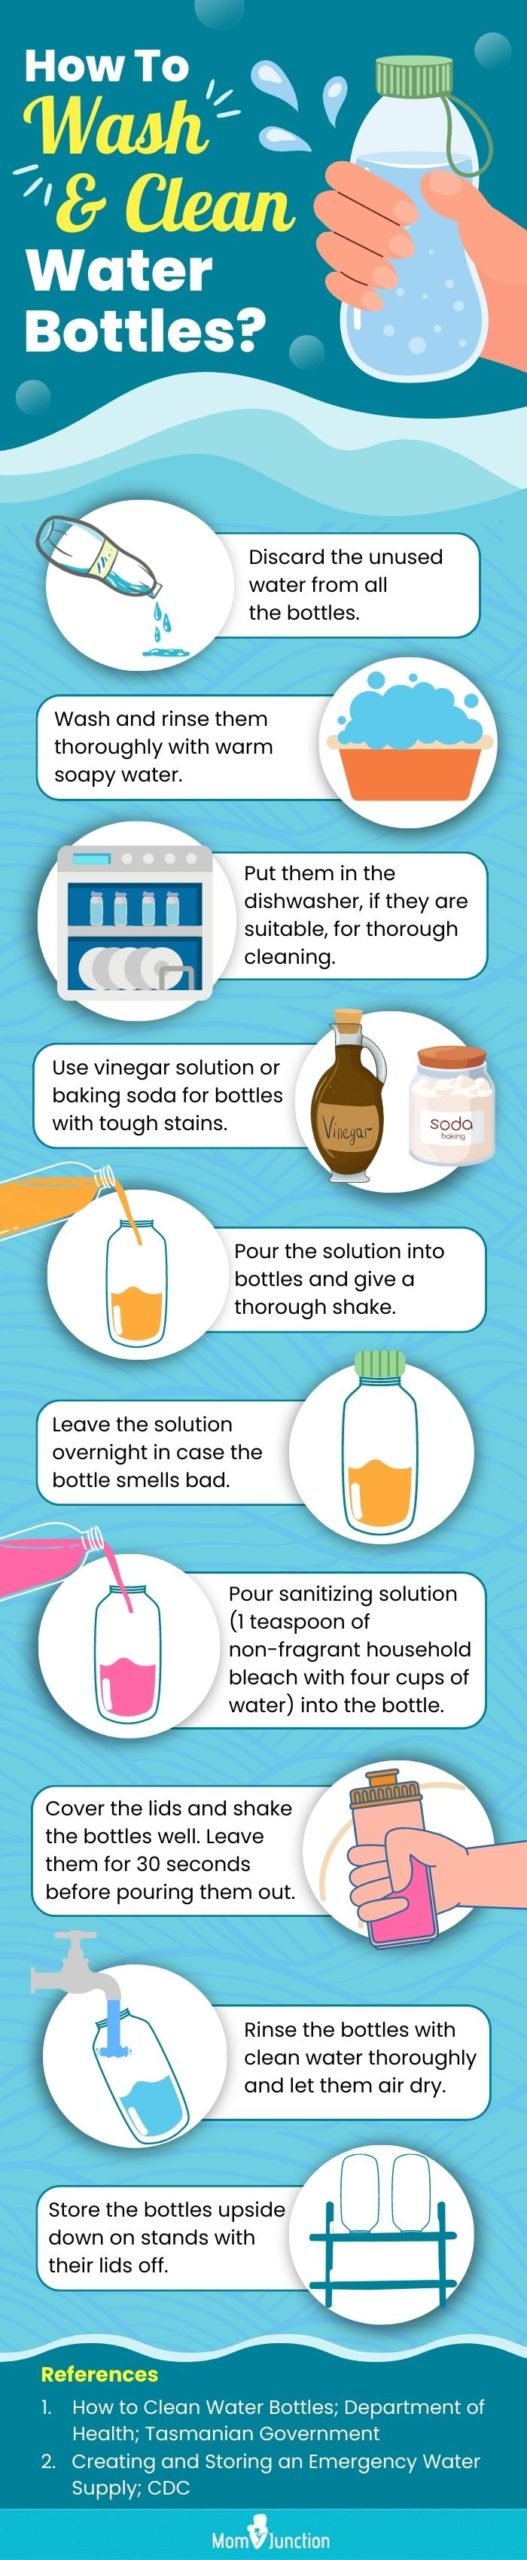 How To Wash And Clean Water Bottles(infographic)